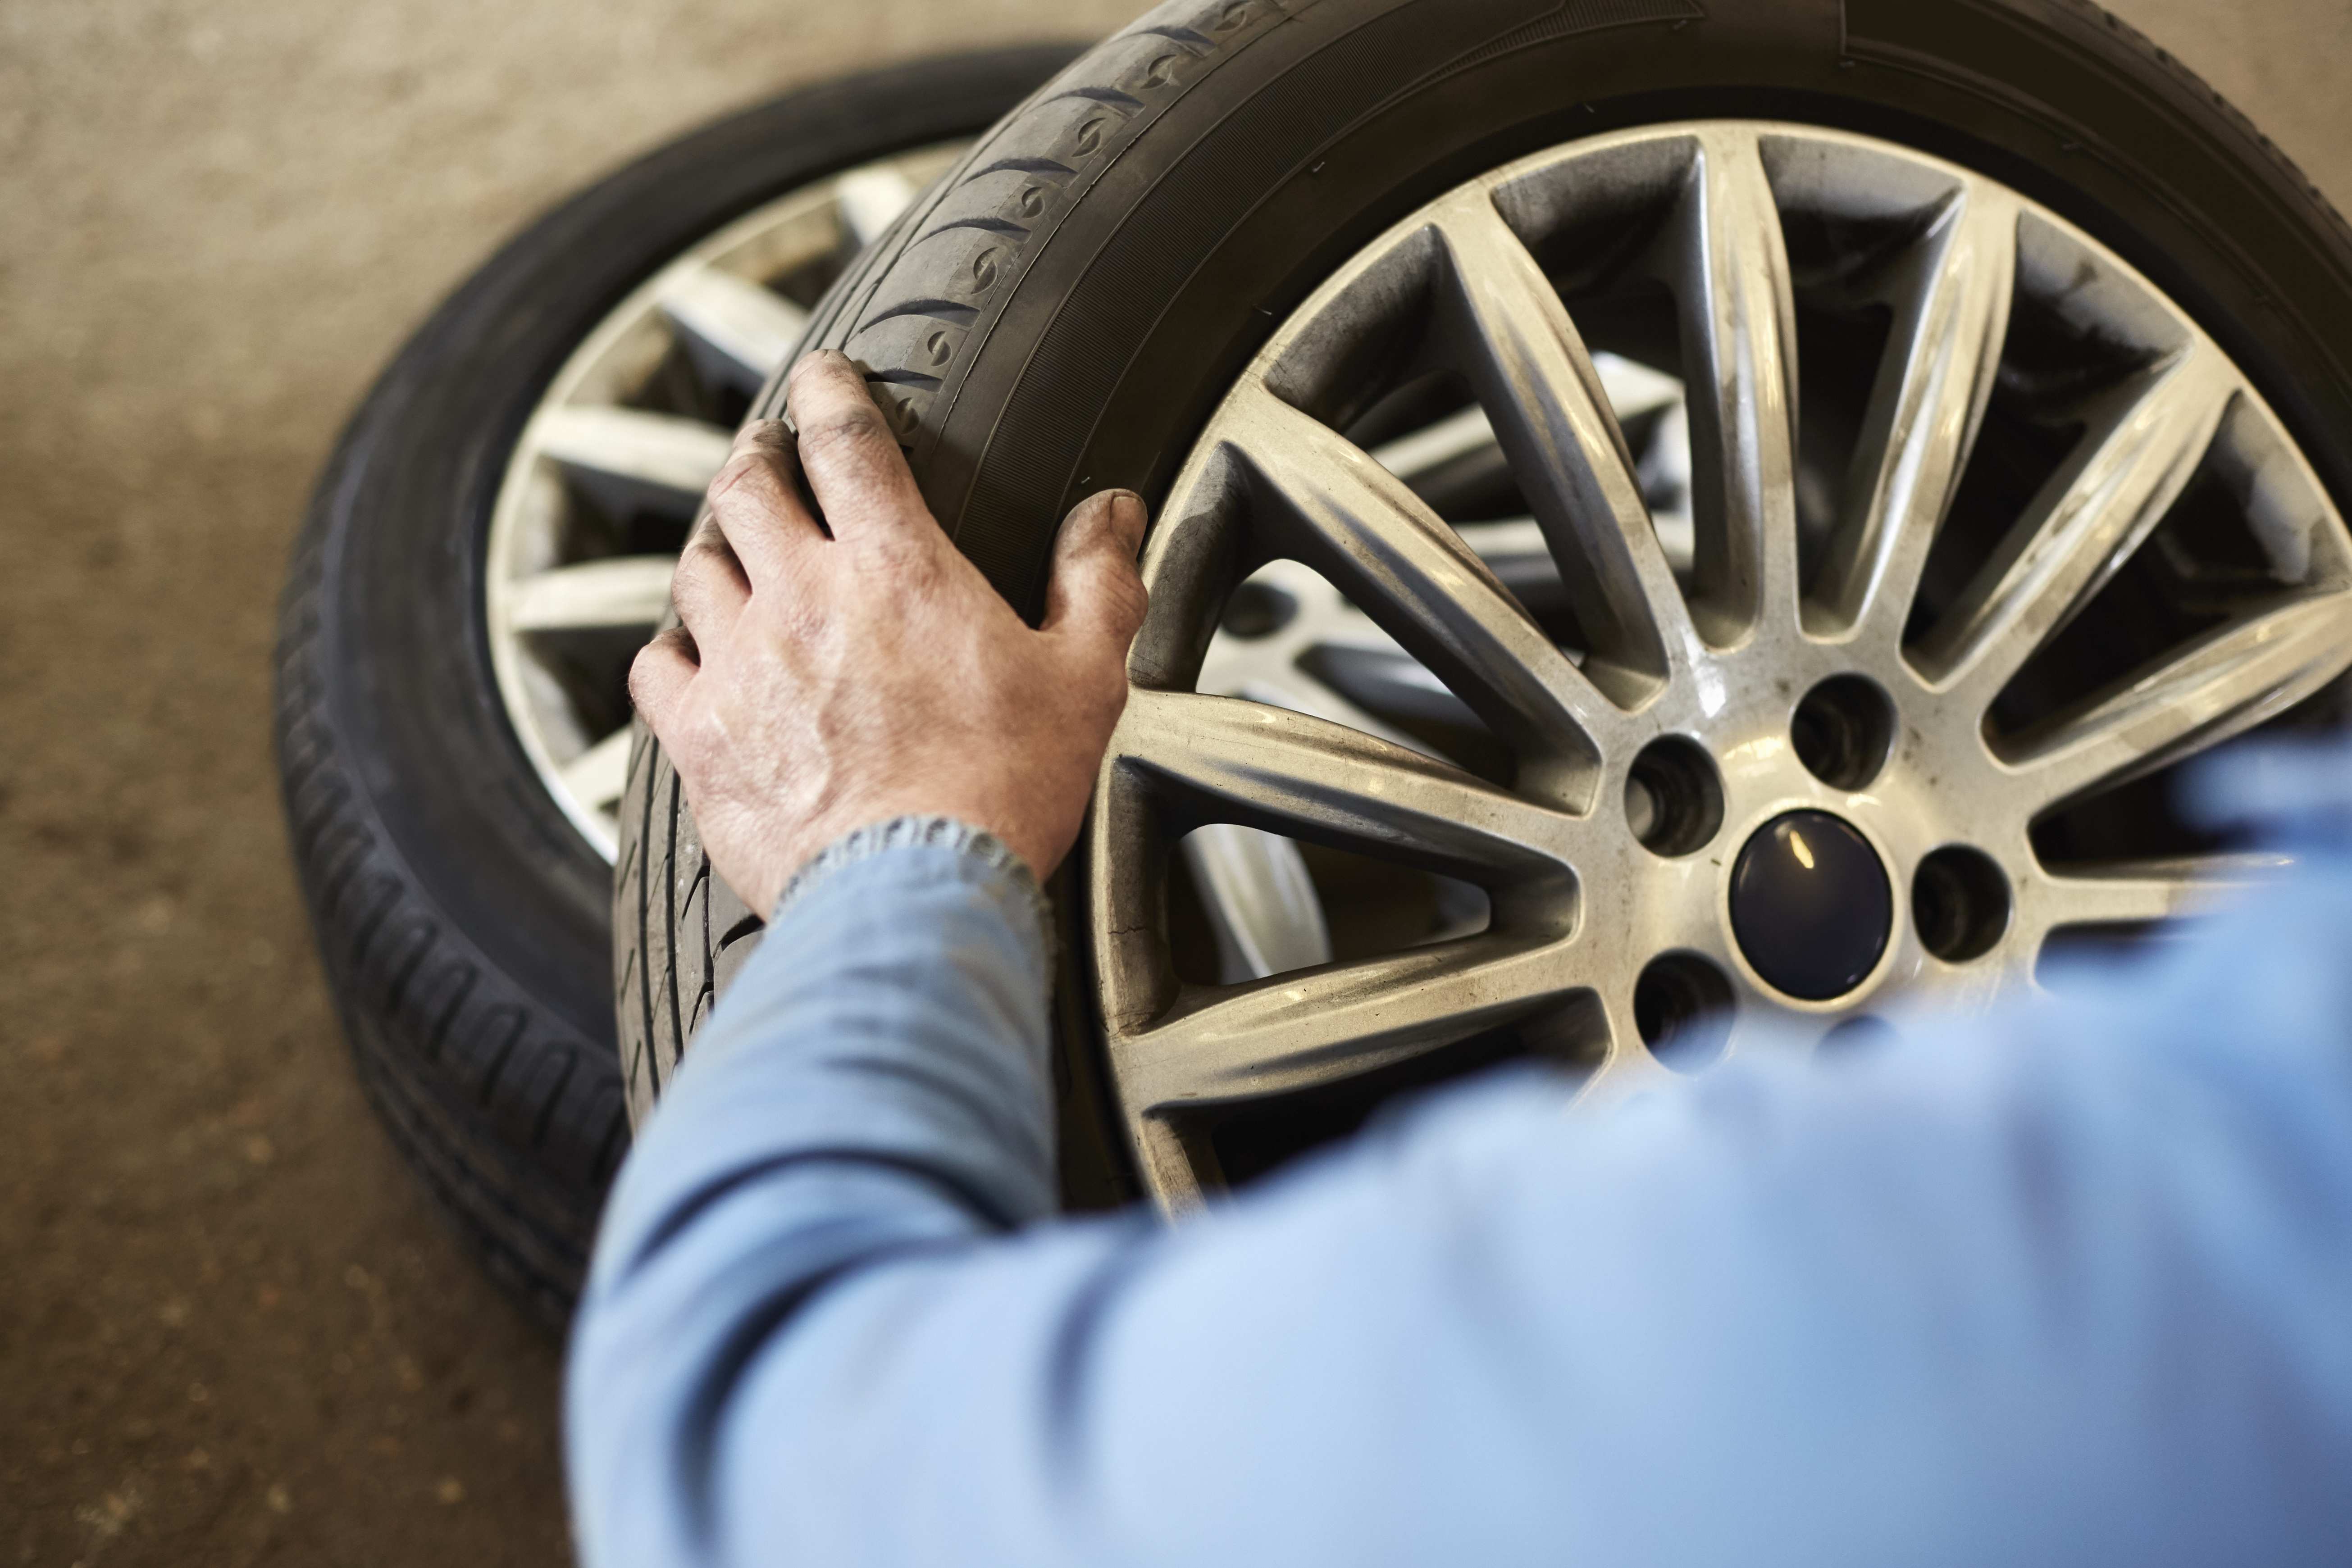 And drivers risk hefty fines if their tyres are found to be defective or illegal